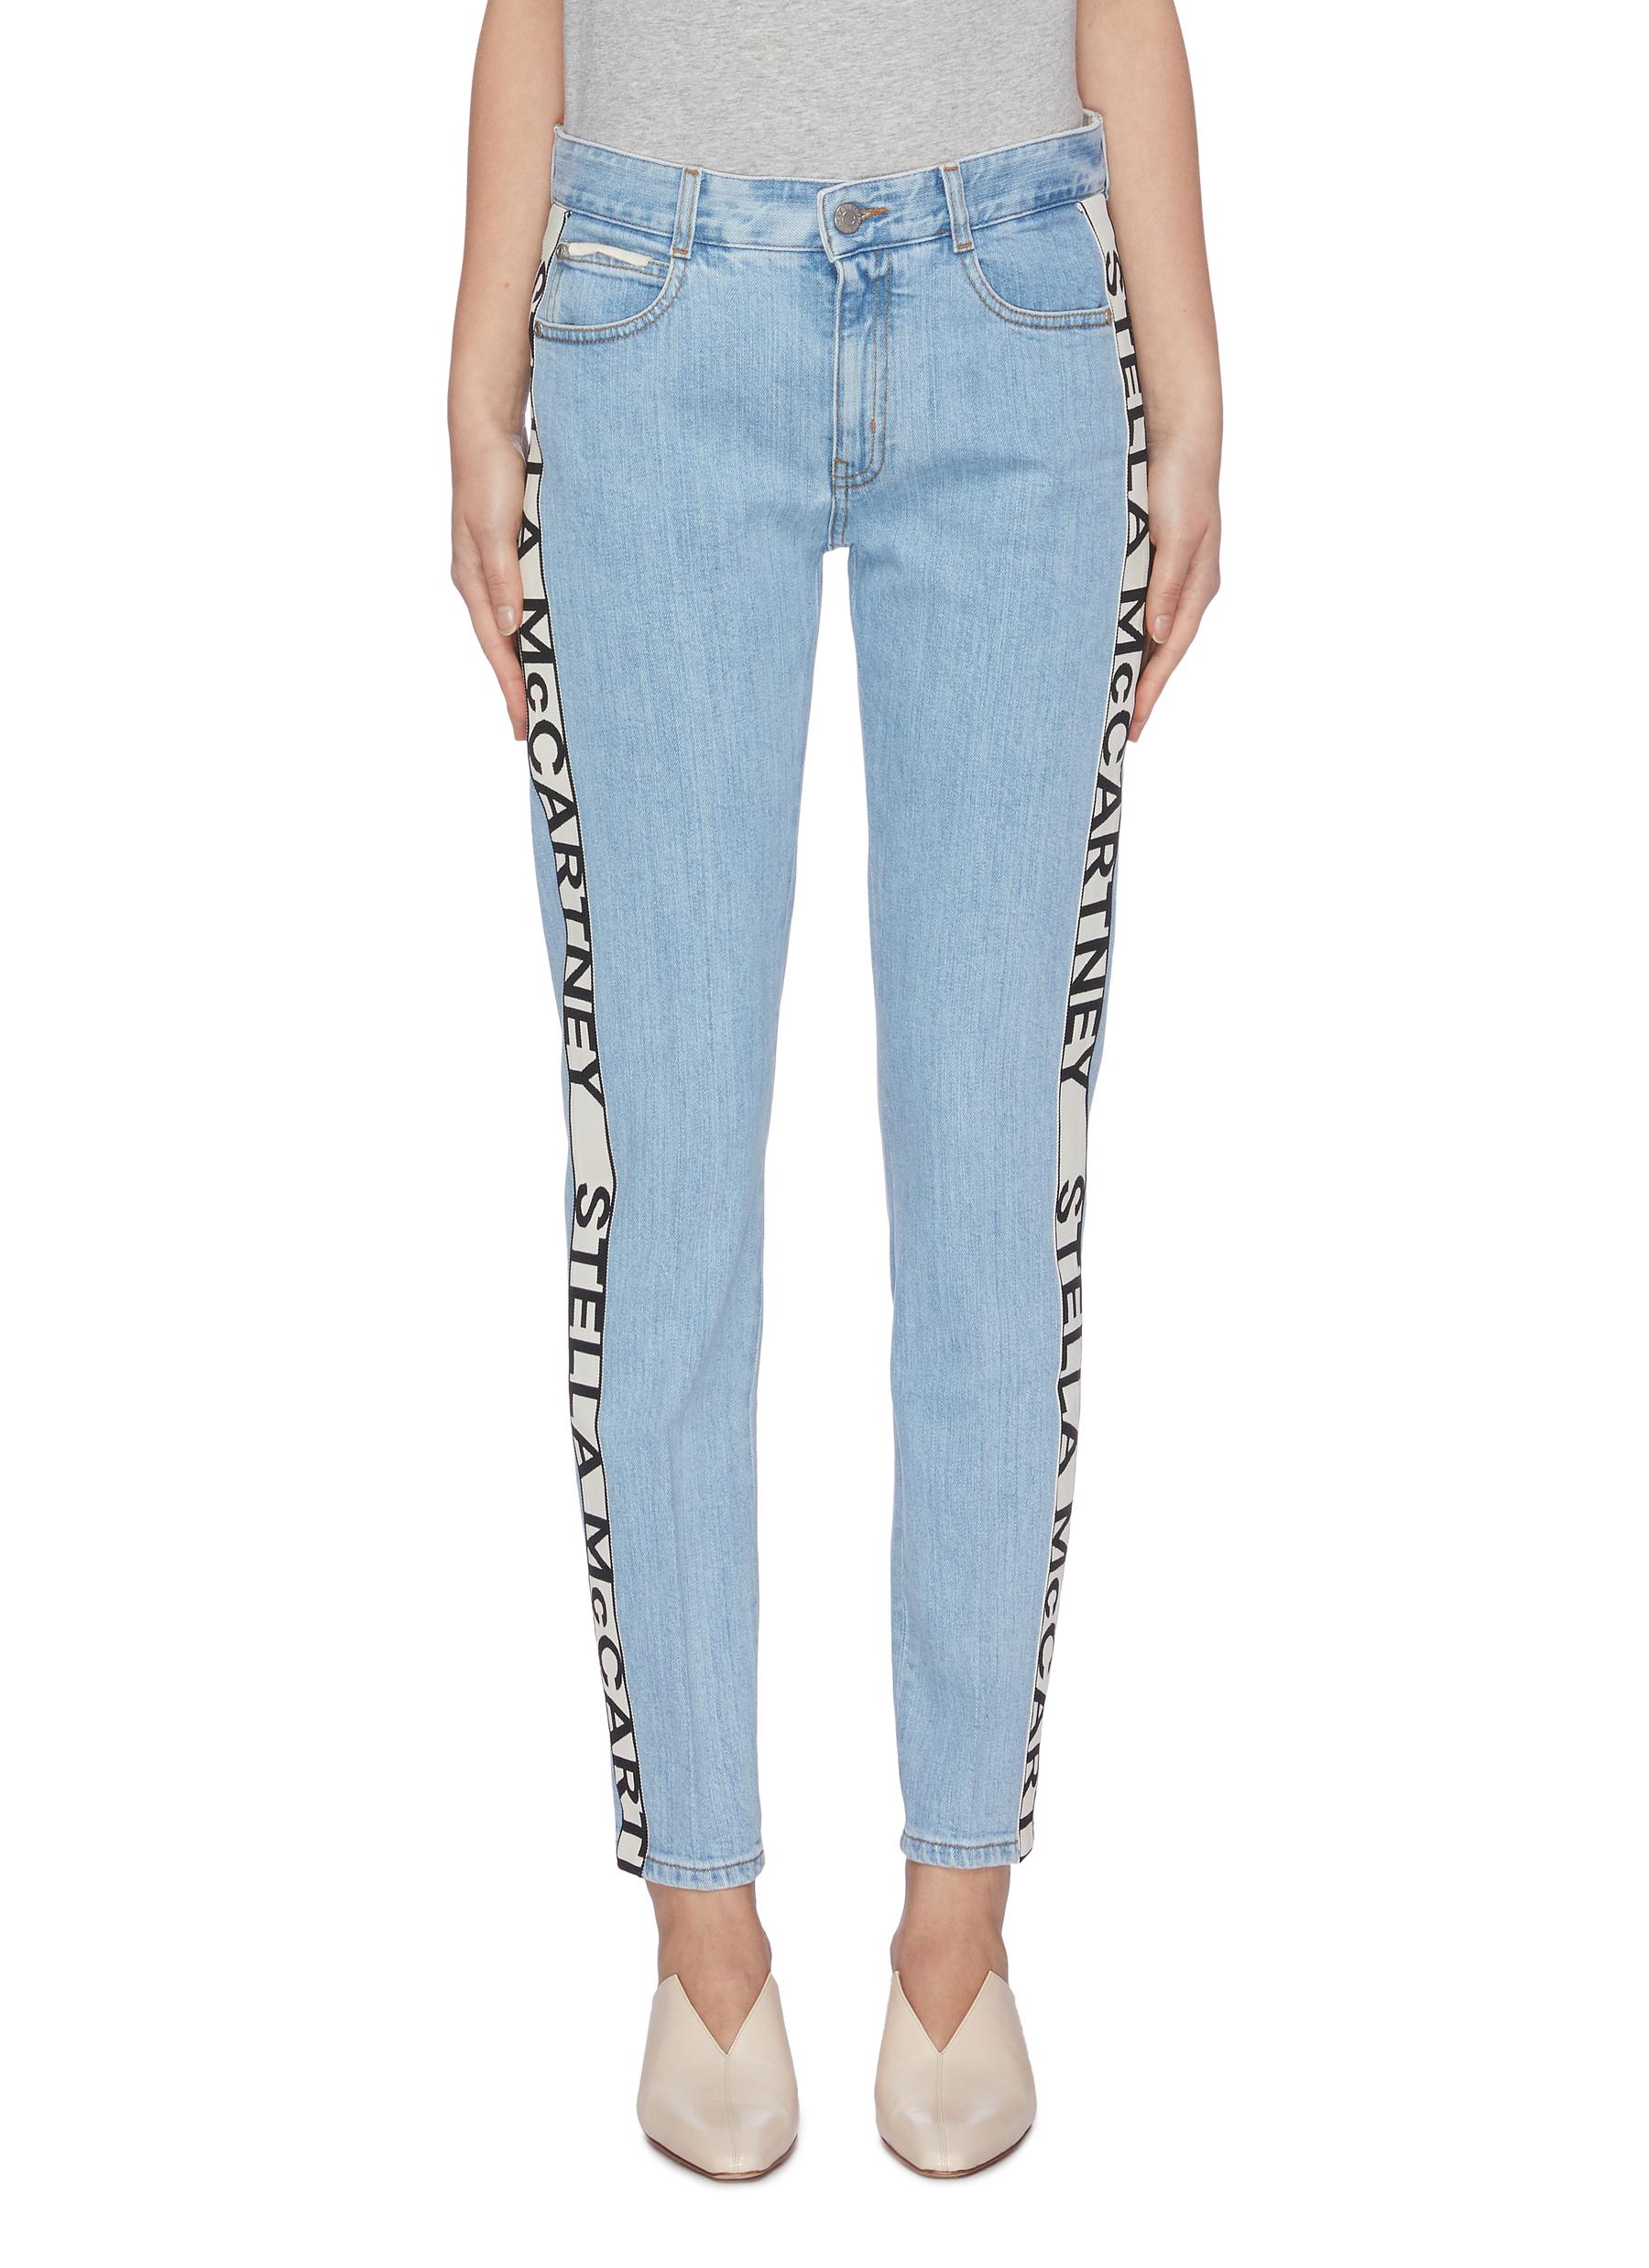 Photo of Stella Mccartney Clothing Jeans online sale